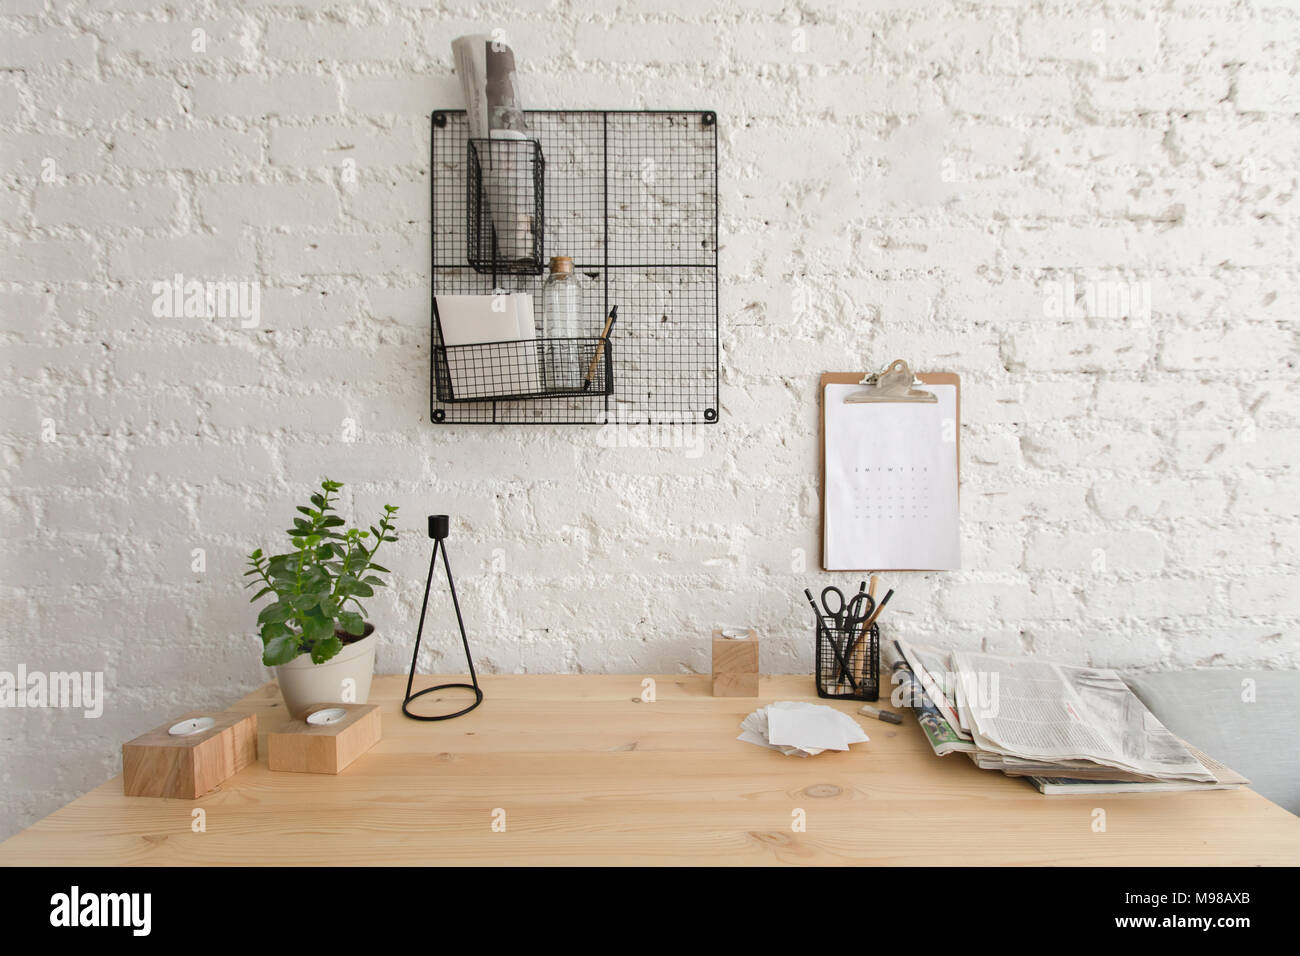 Wooden working table in home office Loft workspace Stock Photo